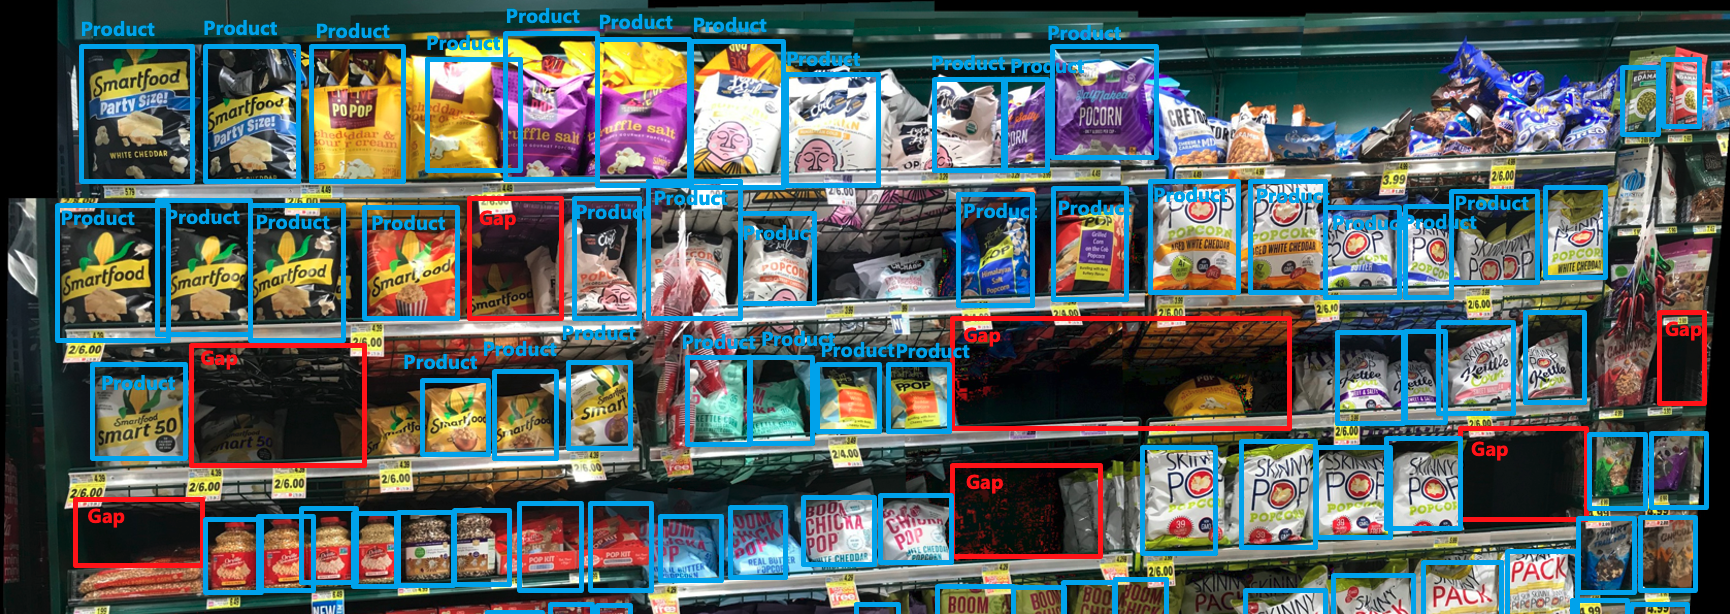 Photo of a retail shelf with products and gaps highlighted with rectangles.